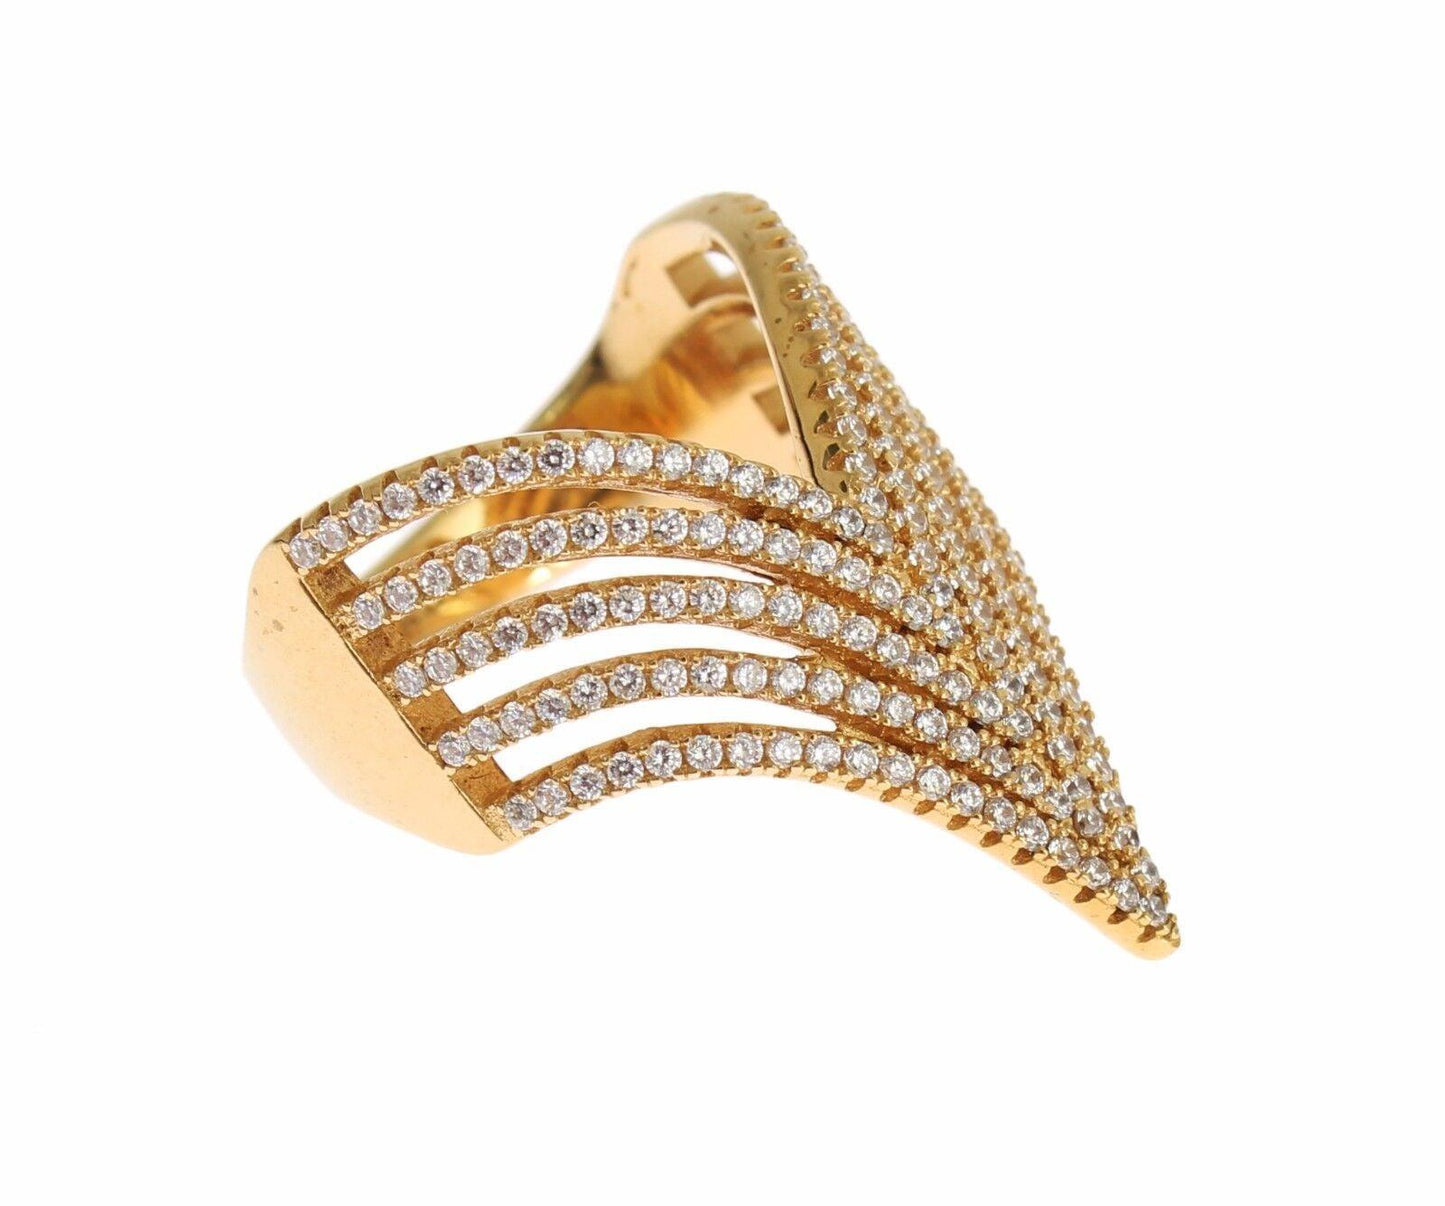 Gold 925 Sterling Silver Ring - Designed by Nialaya Available to Buy at a Discounted Price on Moon Behind The Hill Online Designer Discount Store